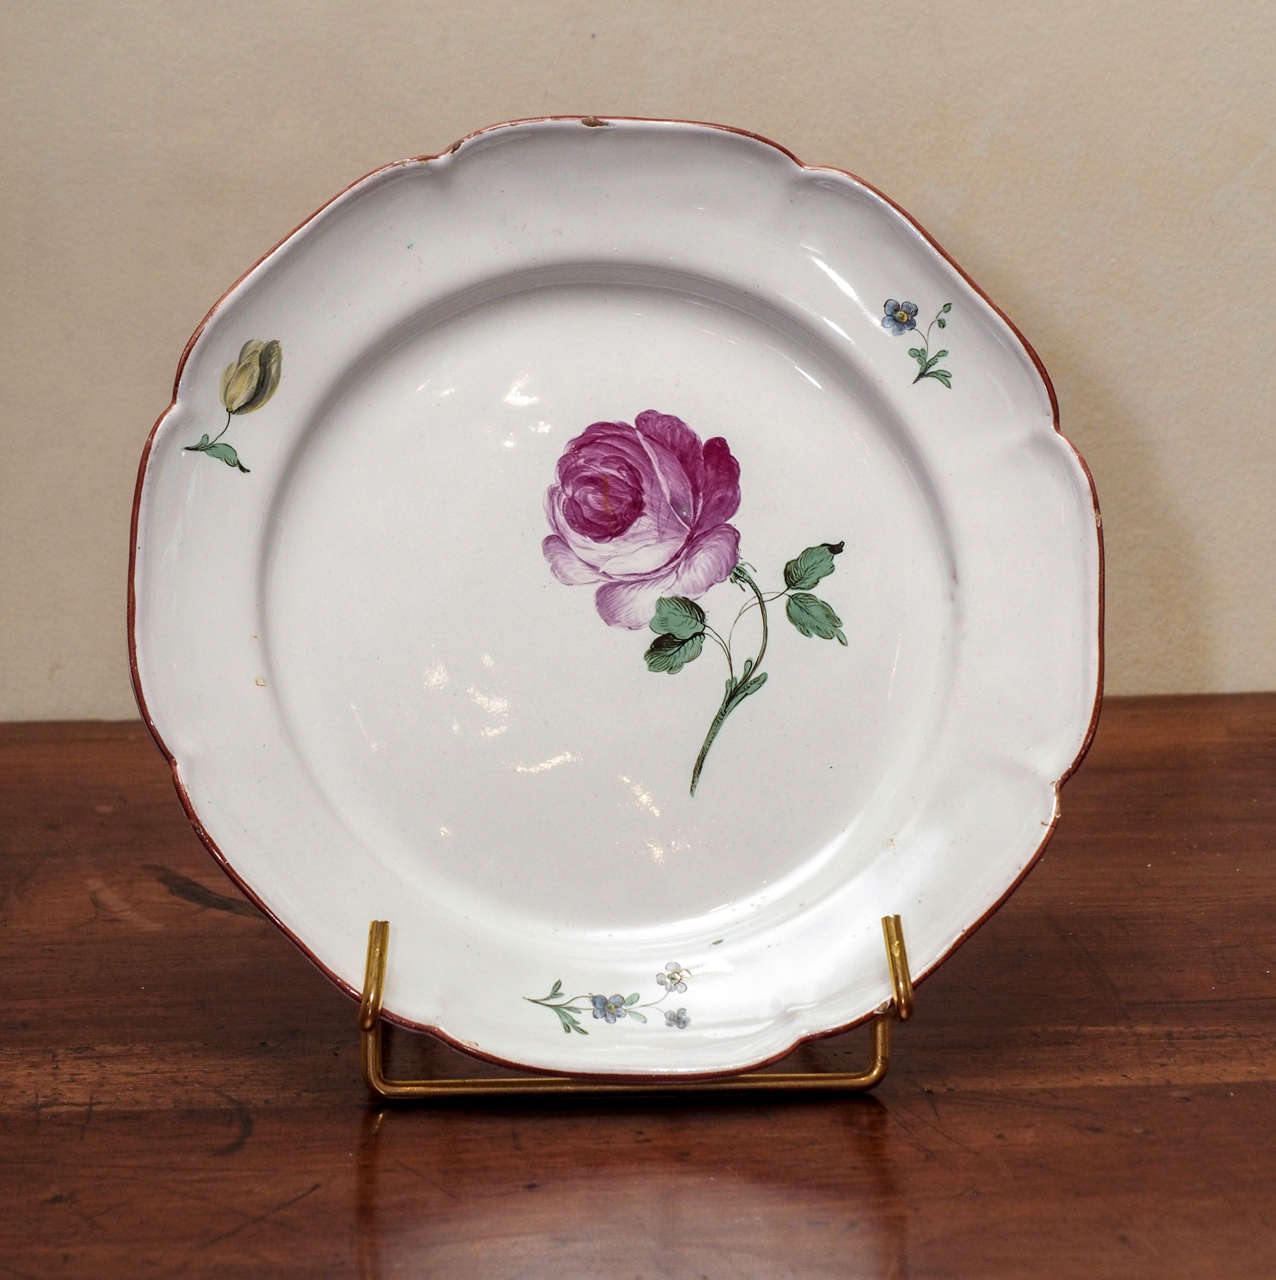 A Niderviller faience plate with rose. Niderviller is one of France's most famous faience manufacturers.